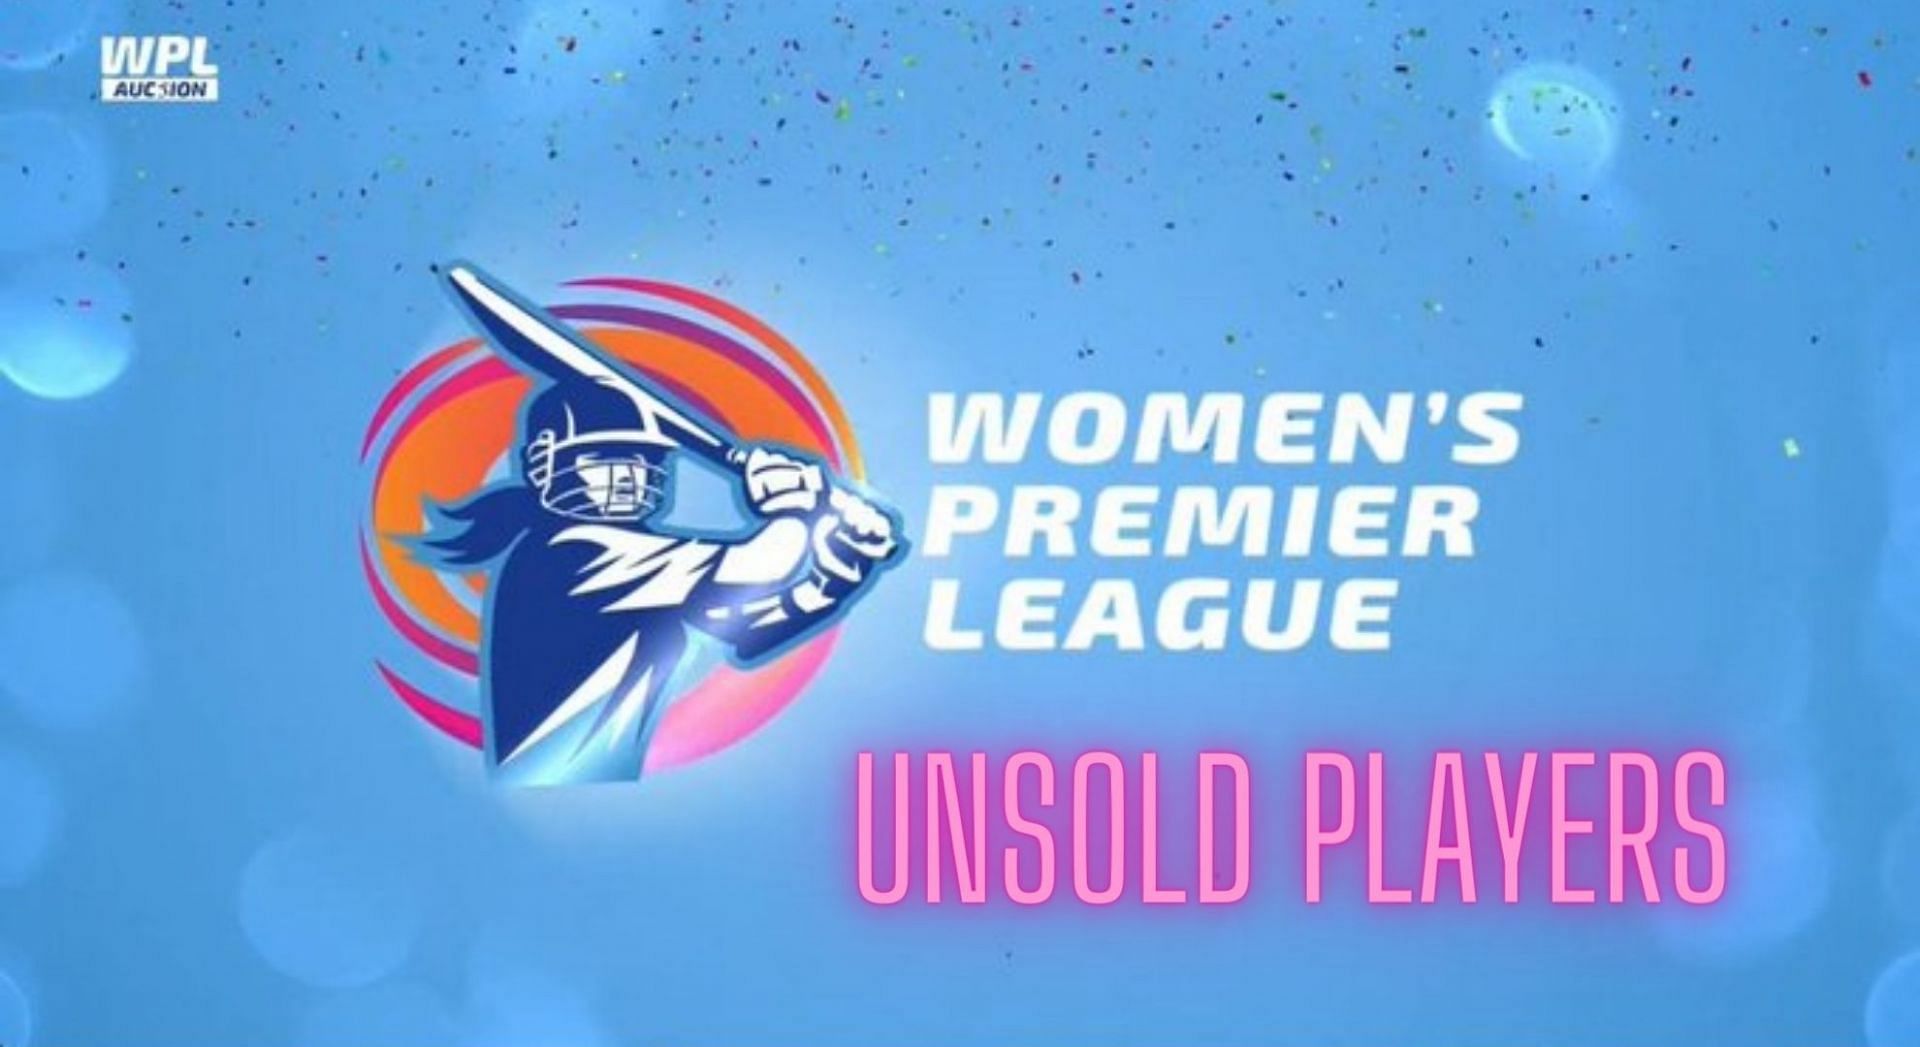 Unsold Players in WPL 2023: List of Unsold Players in WPL Auction 2023 with Prices